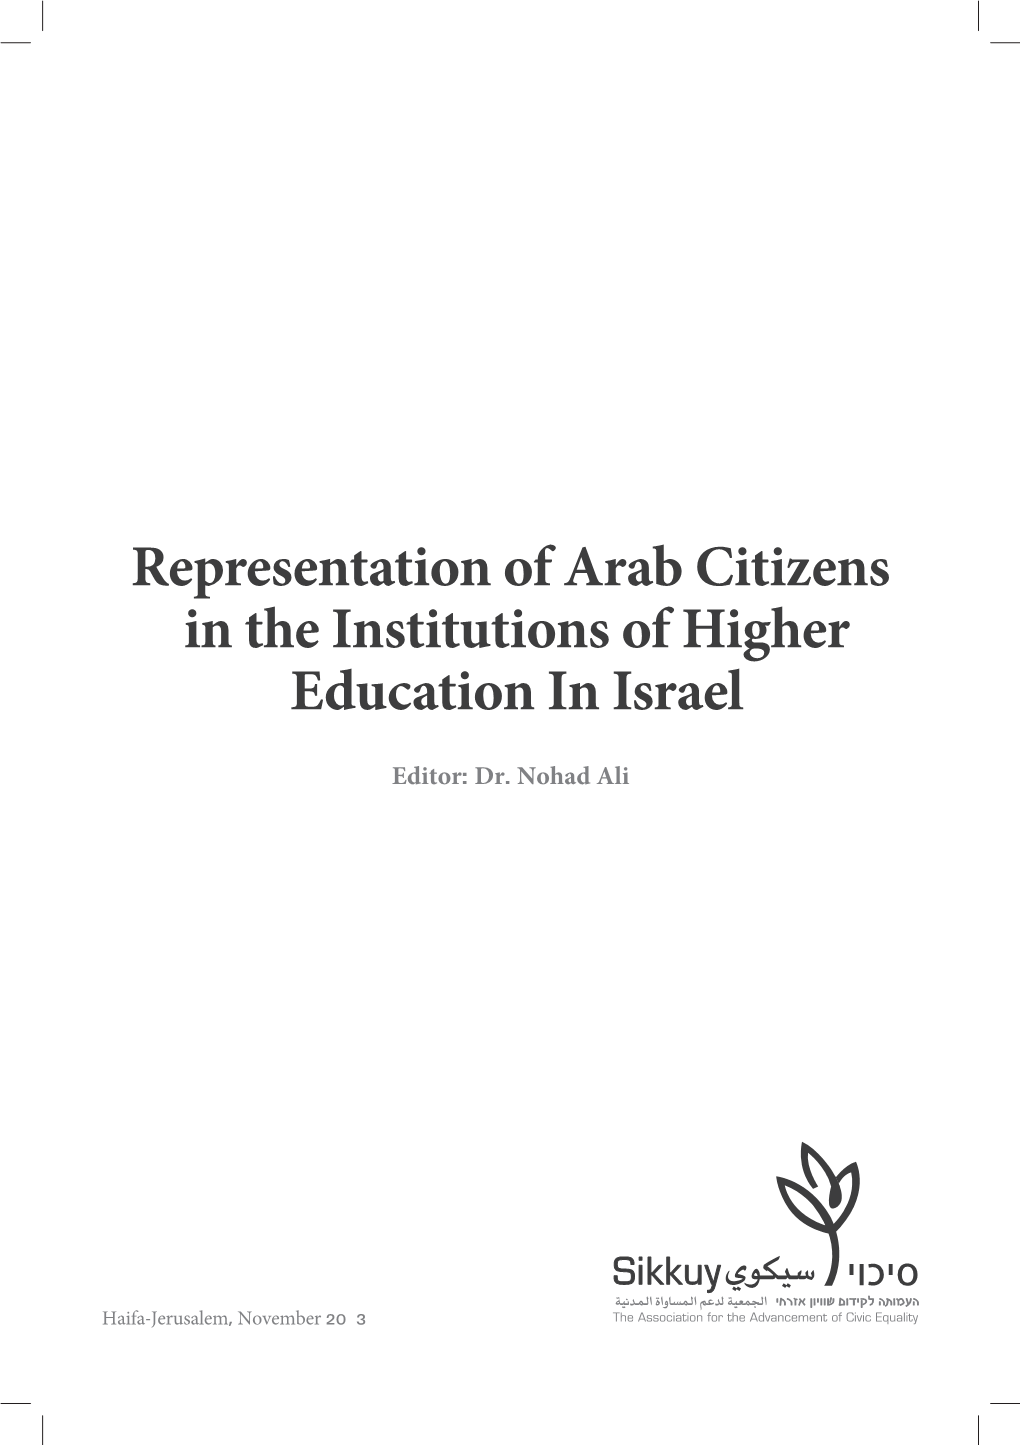 Representation of Arab Citizens in the Institutions of Higher Education in Israel